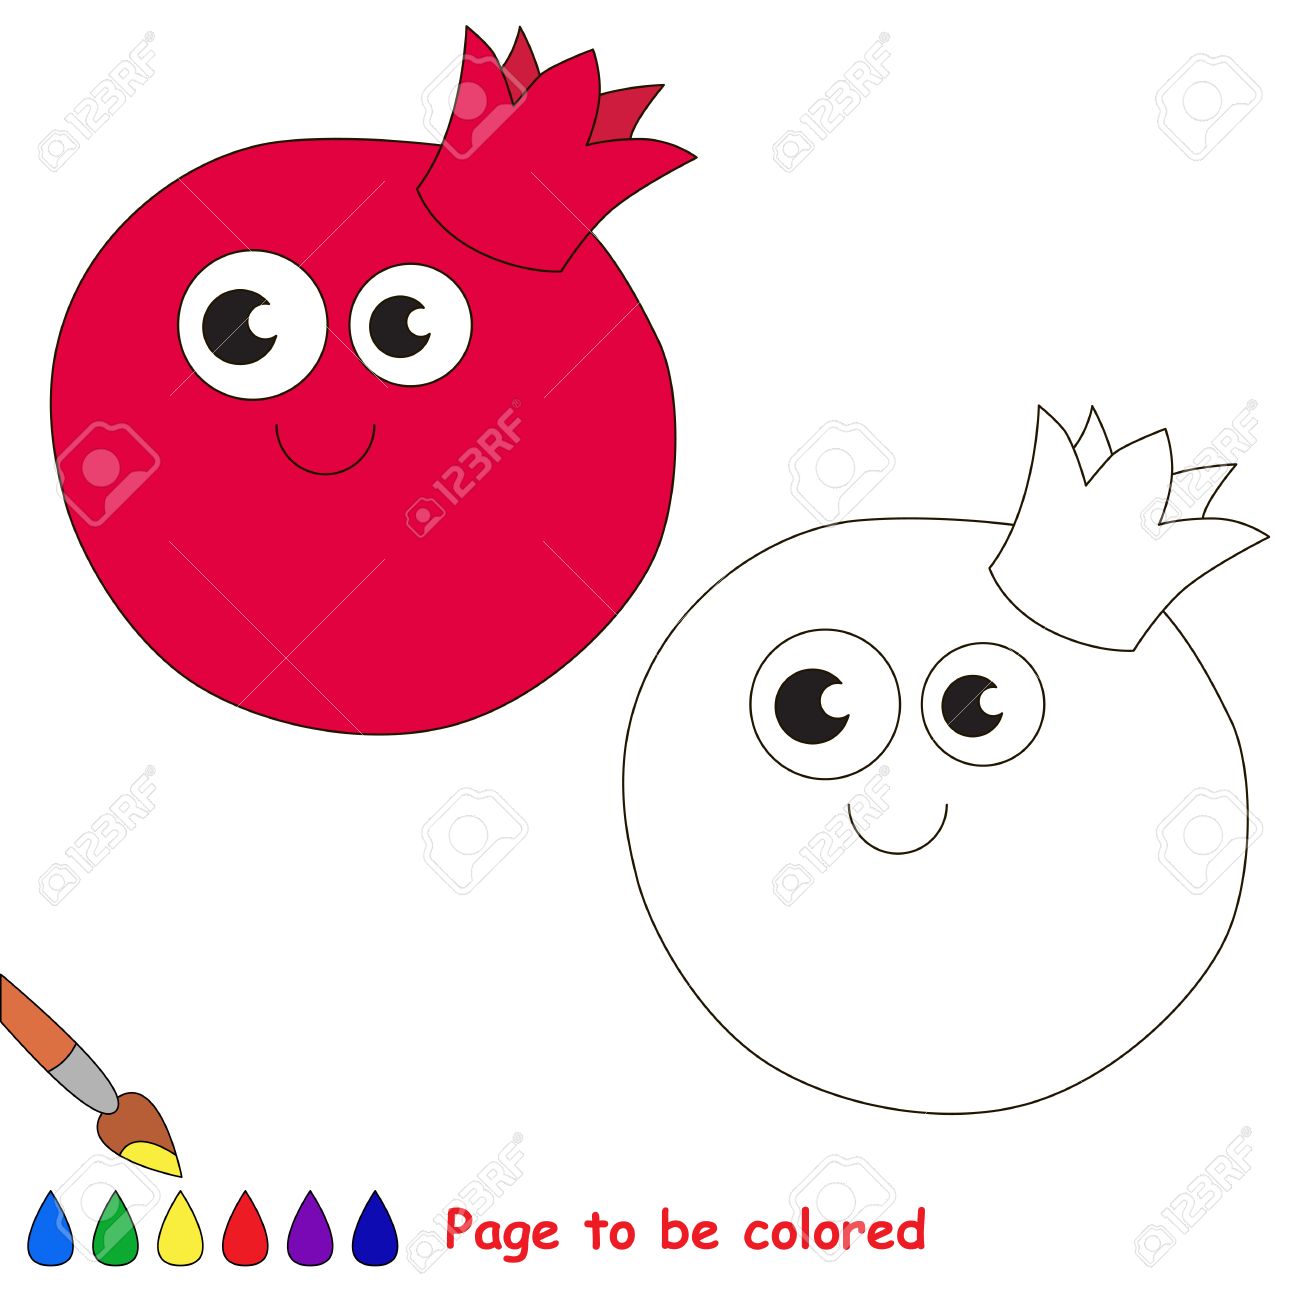 Funny pomegranate to be colored coloring book to educate kids learn colors visual educational game easy kid gaming and primary education simple level of difficulty page for coloring royalty free svg cliparts